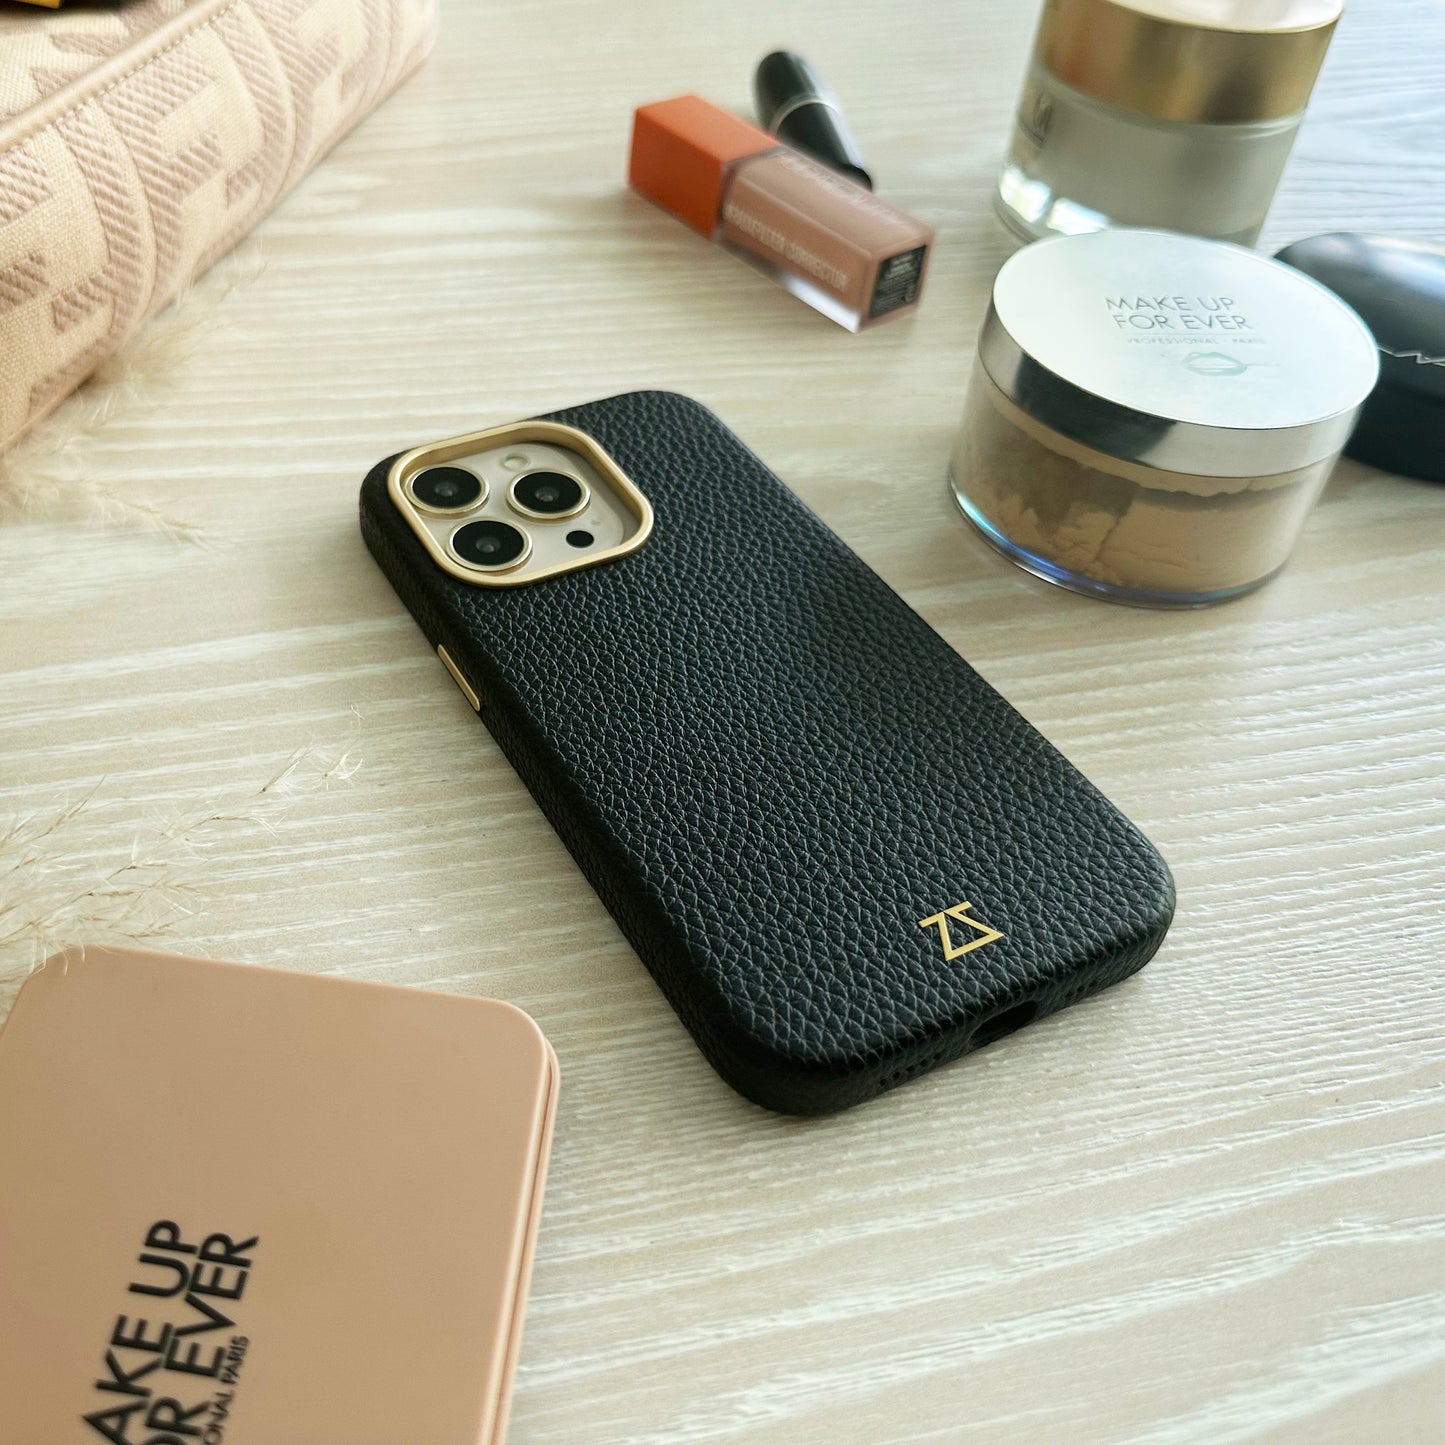 Black Leather Magnetic Case with Matte Gold Detail